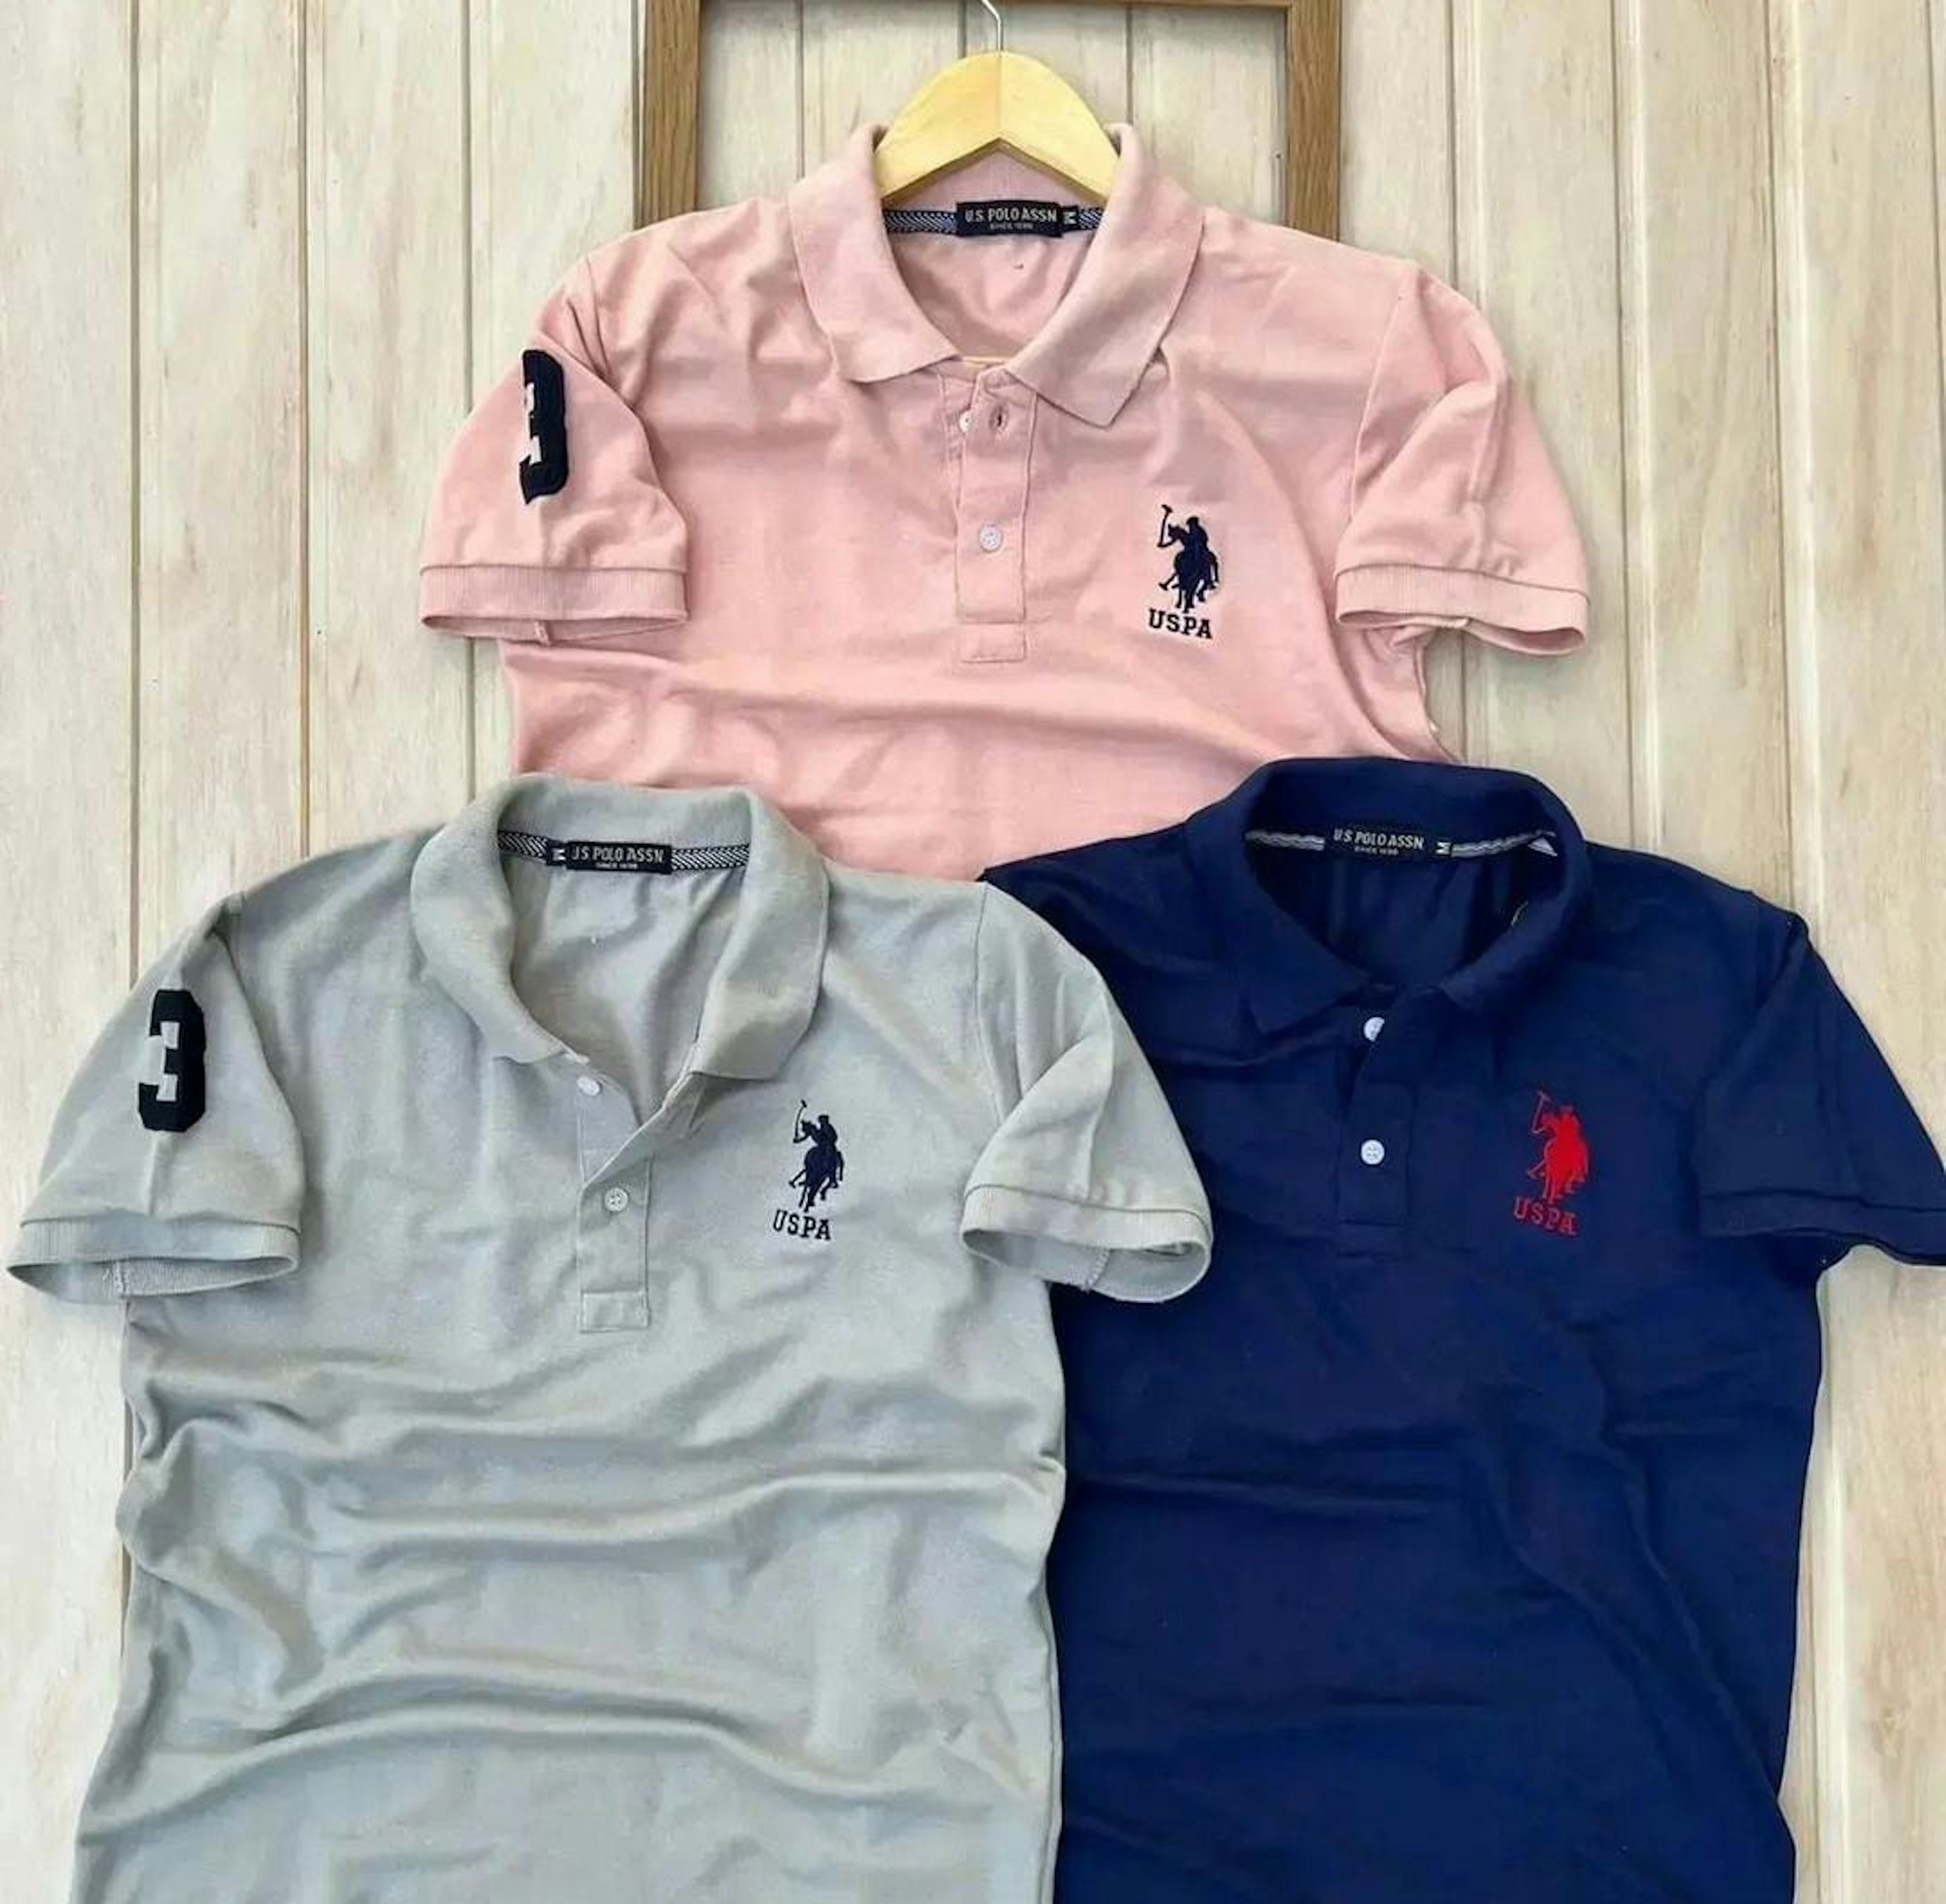 View - U.S POLO T-shirt photos, U.S POLO T-shirt available in Rajkot, make deal in 840